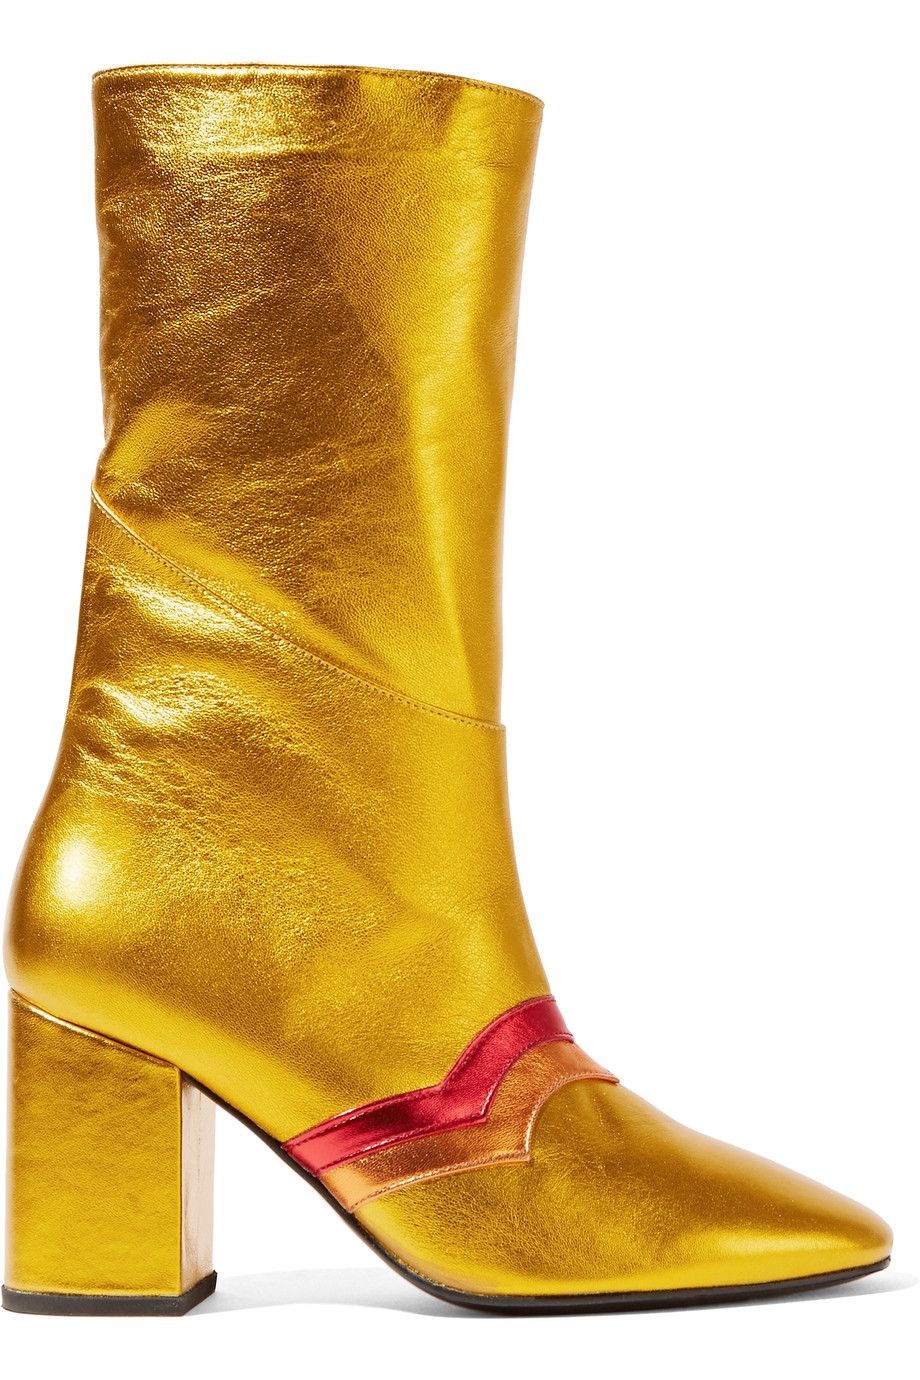 Footwear, Yellow, High heels, Boot, Amber, Fashion, Tan, Sandal, Leather, Costume accessory, 